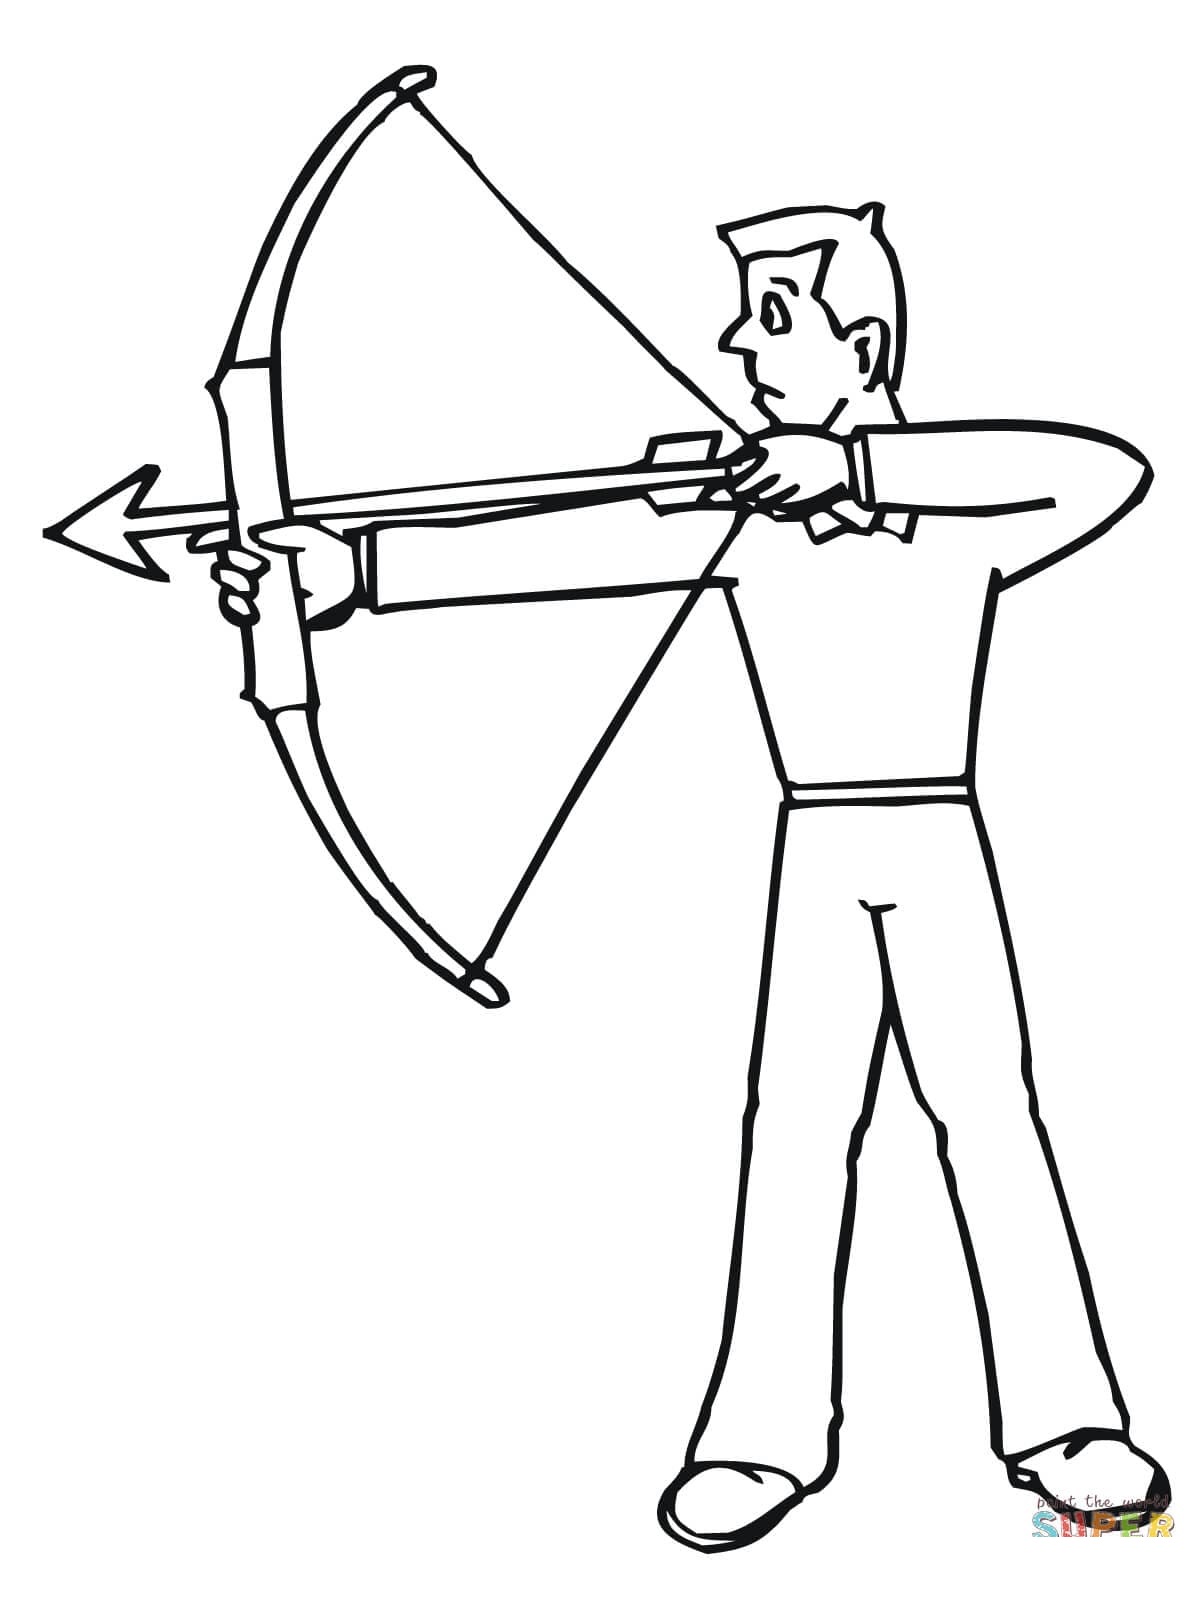 Archer Ready To Shoot Cute Coloring Page